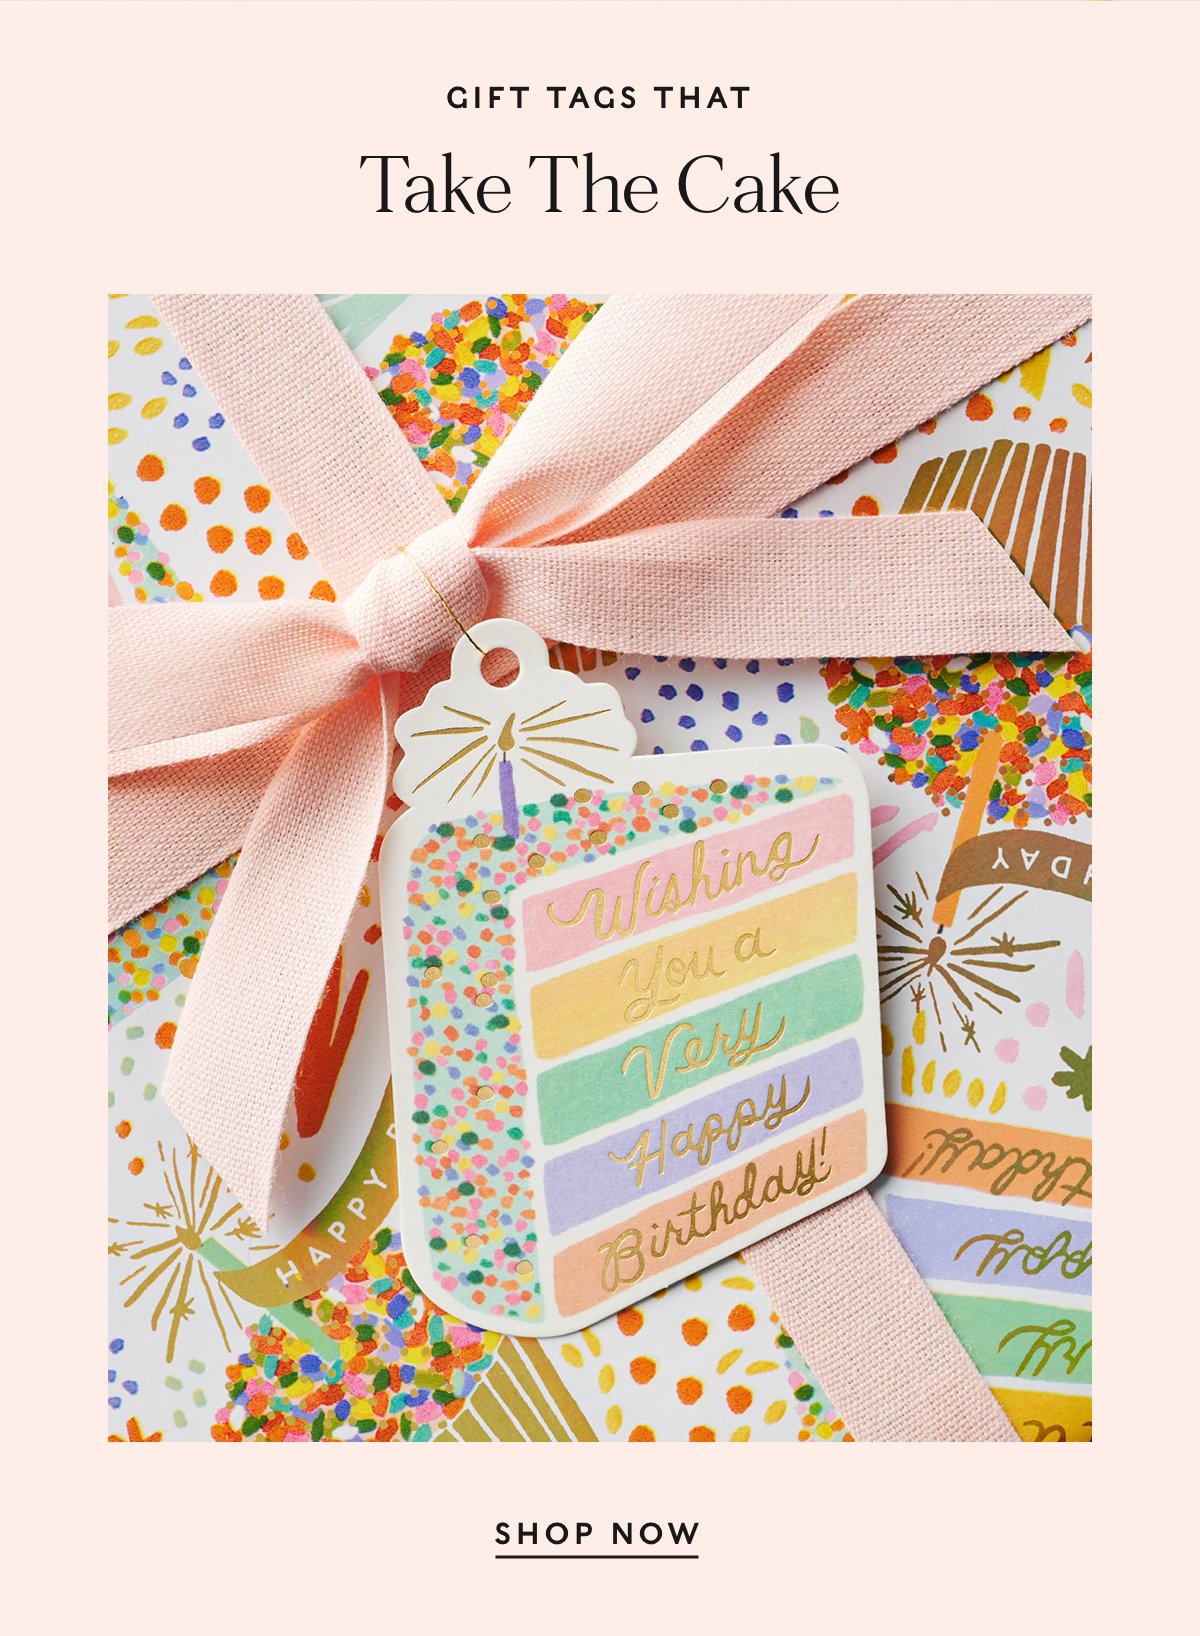 Gift tags that take the cake. Shop now